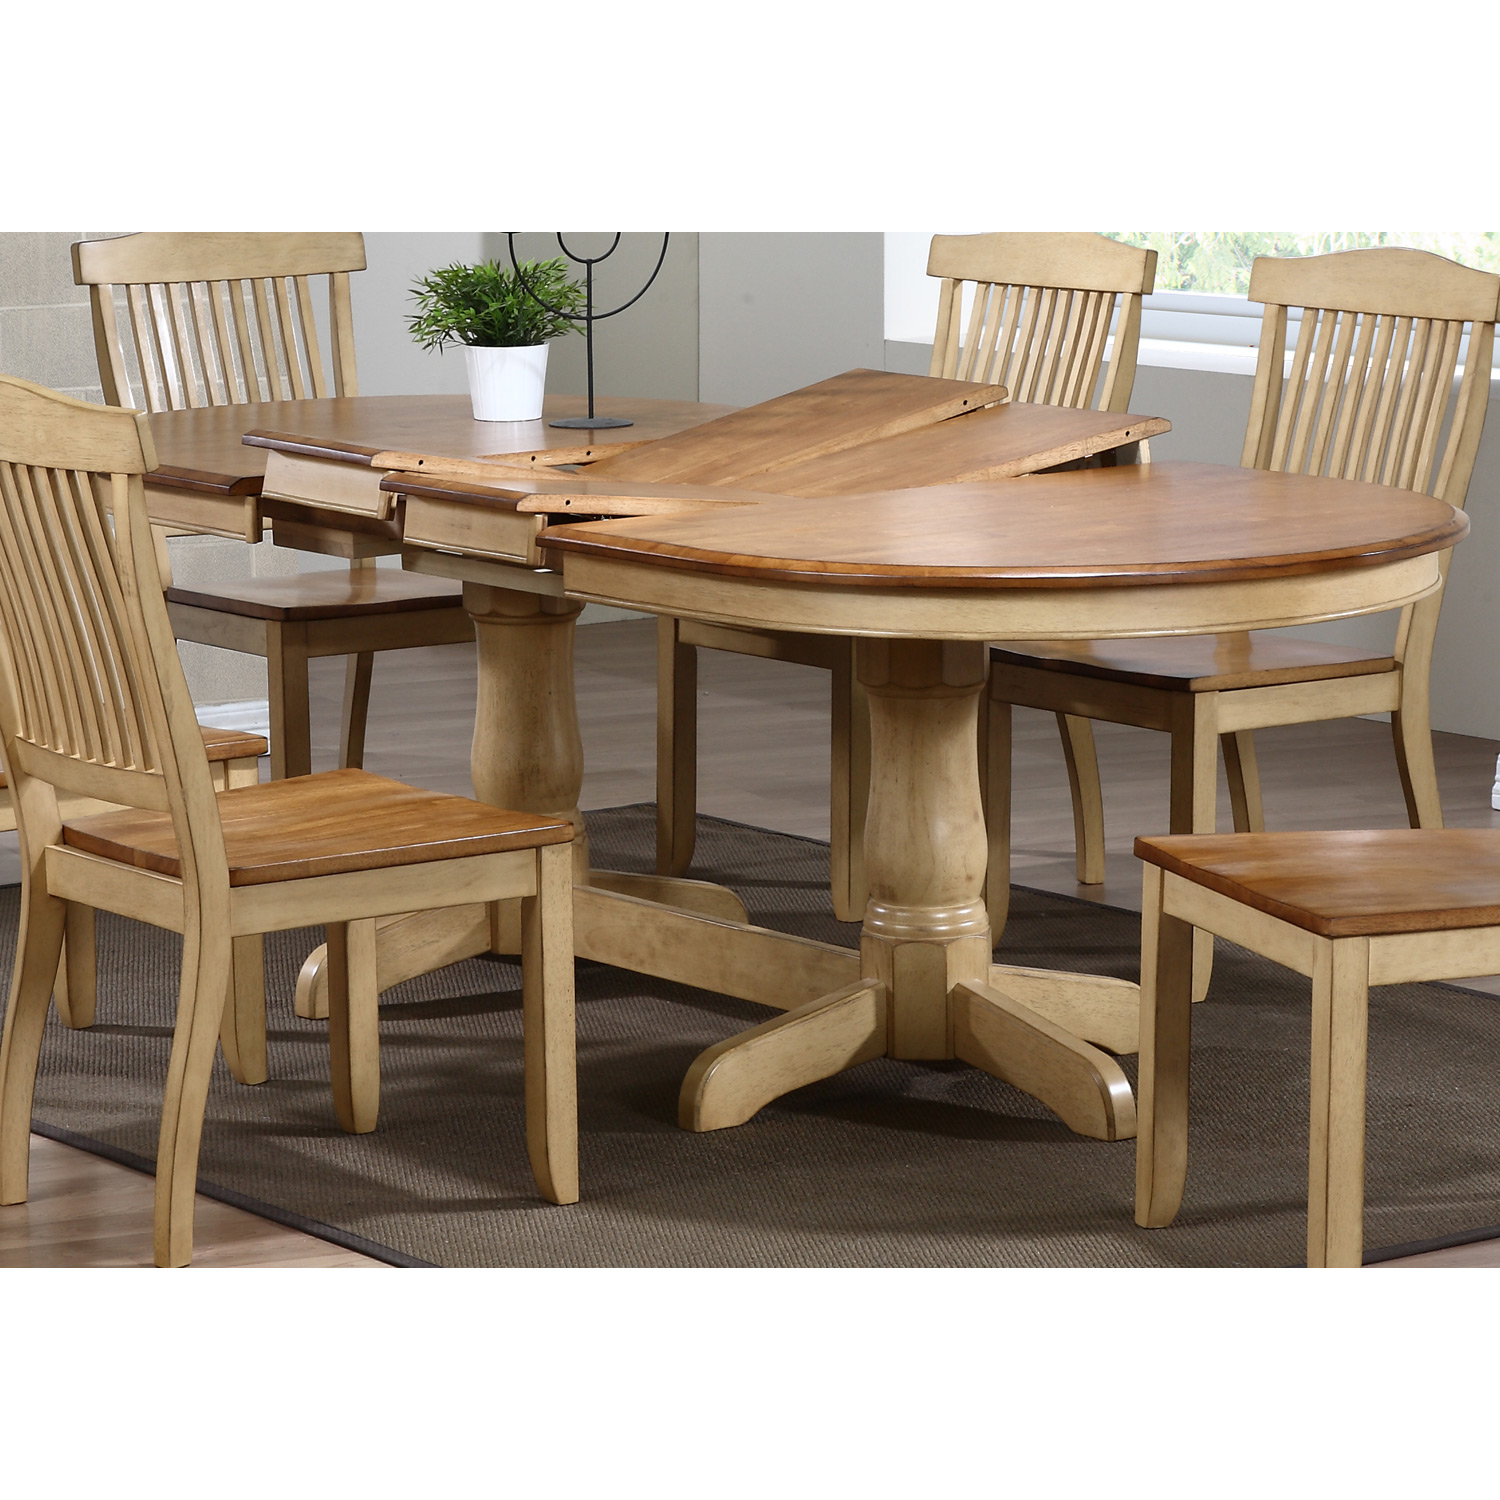 Gatsby Oval Dining Table - Double Butterfly Leaf, Honey & Sand | DCG Stores